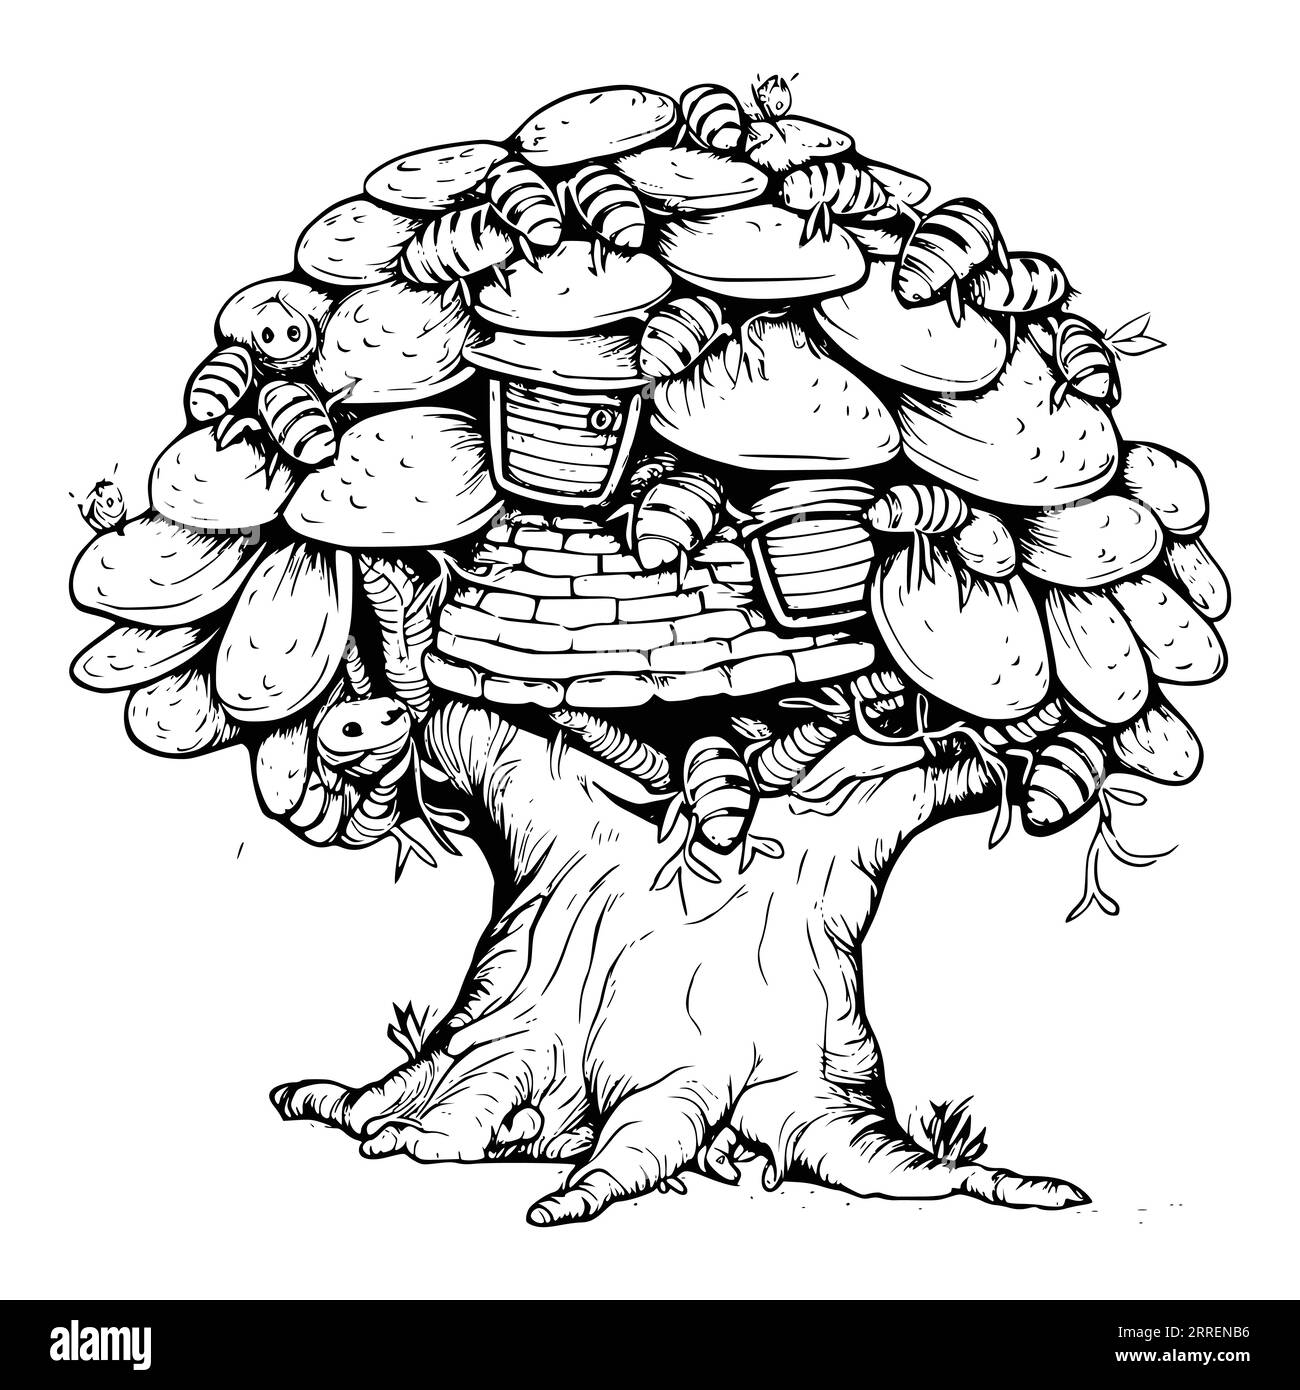 Beehive On A Tree Coloring Page for Kids Stock Vector